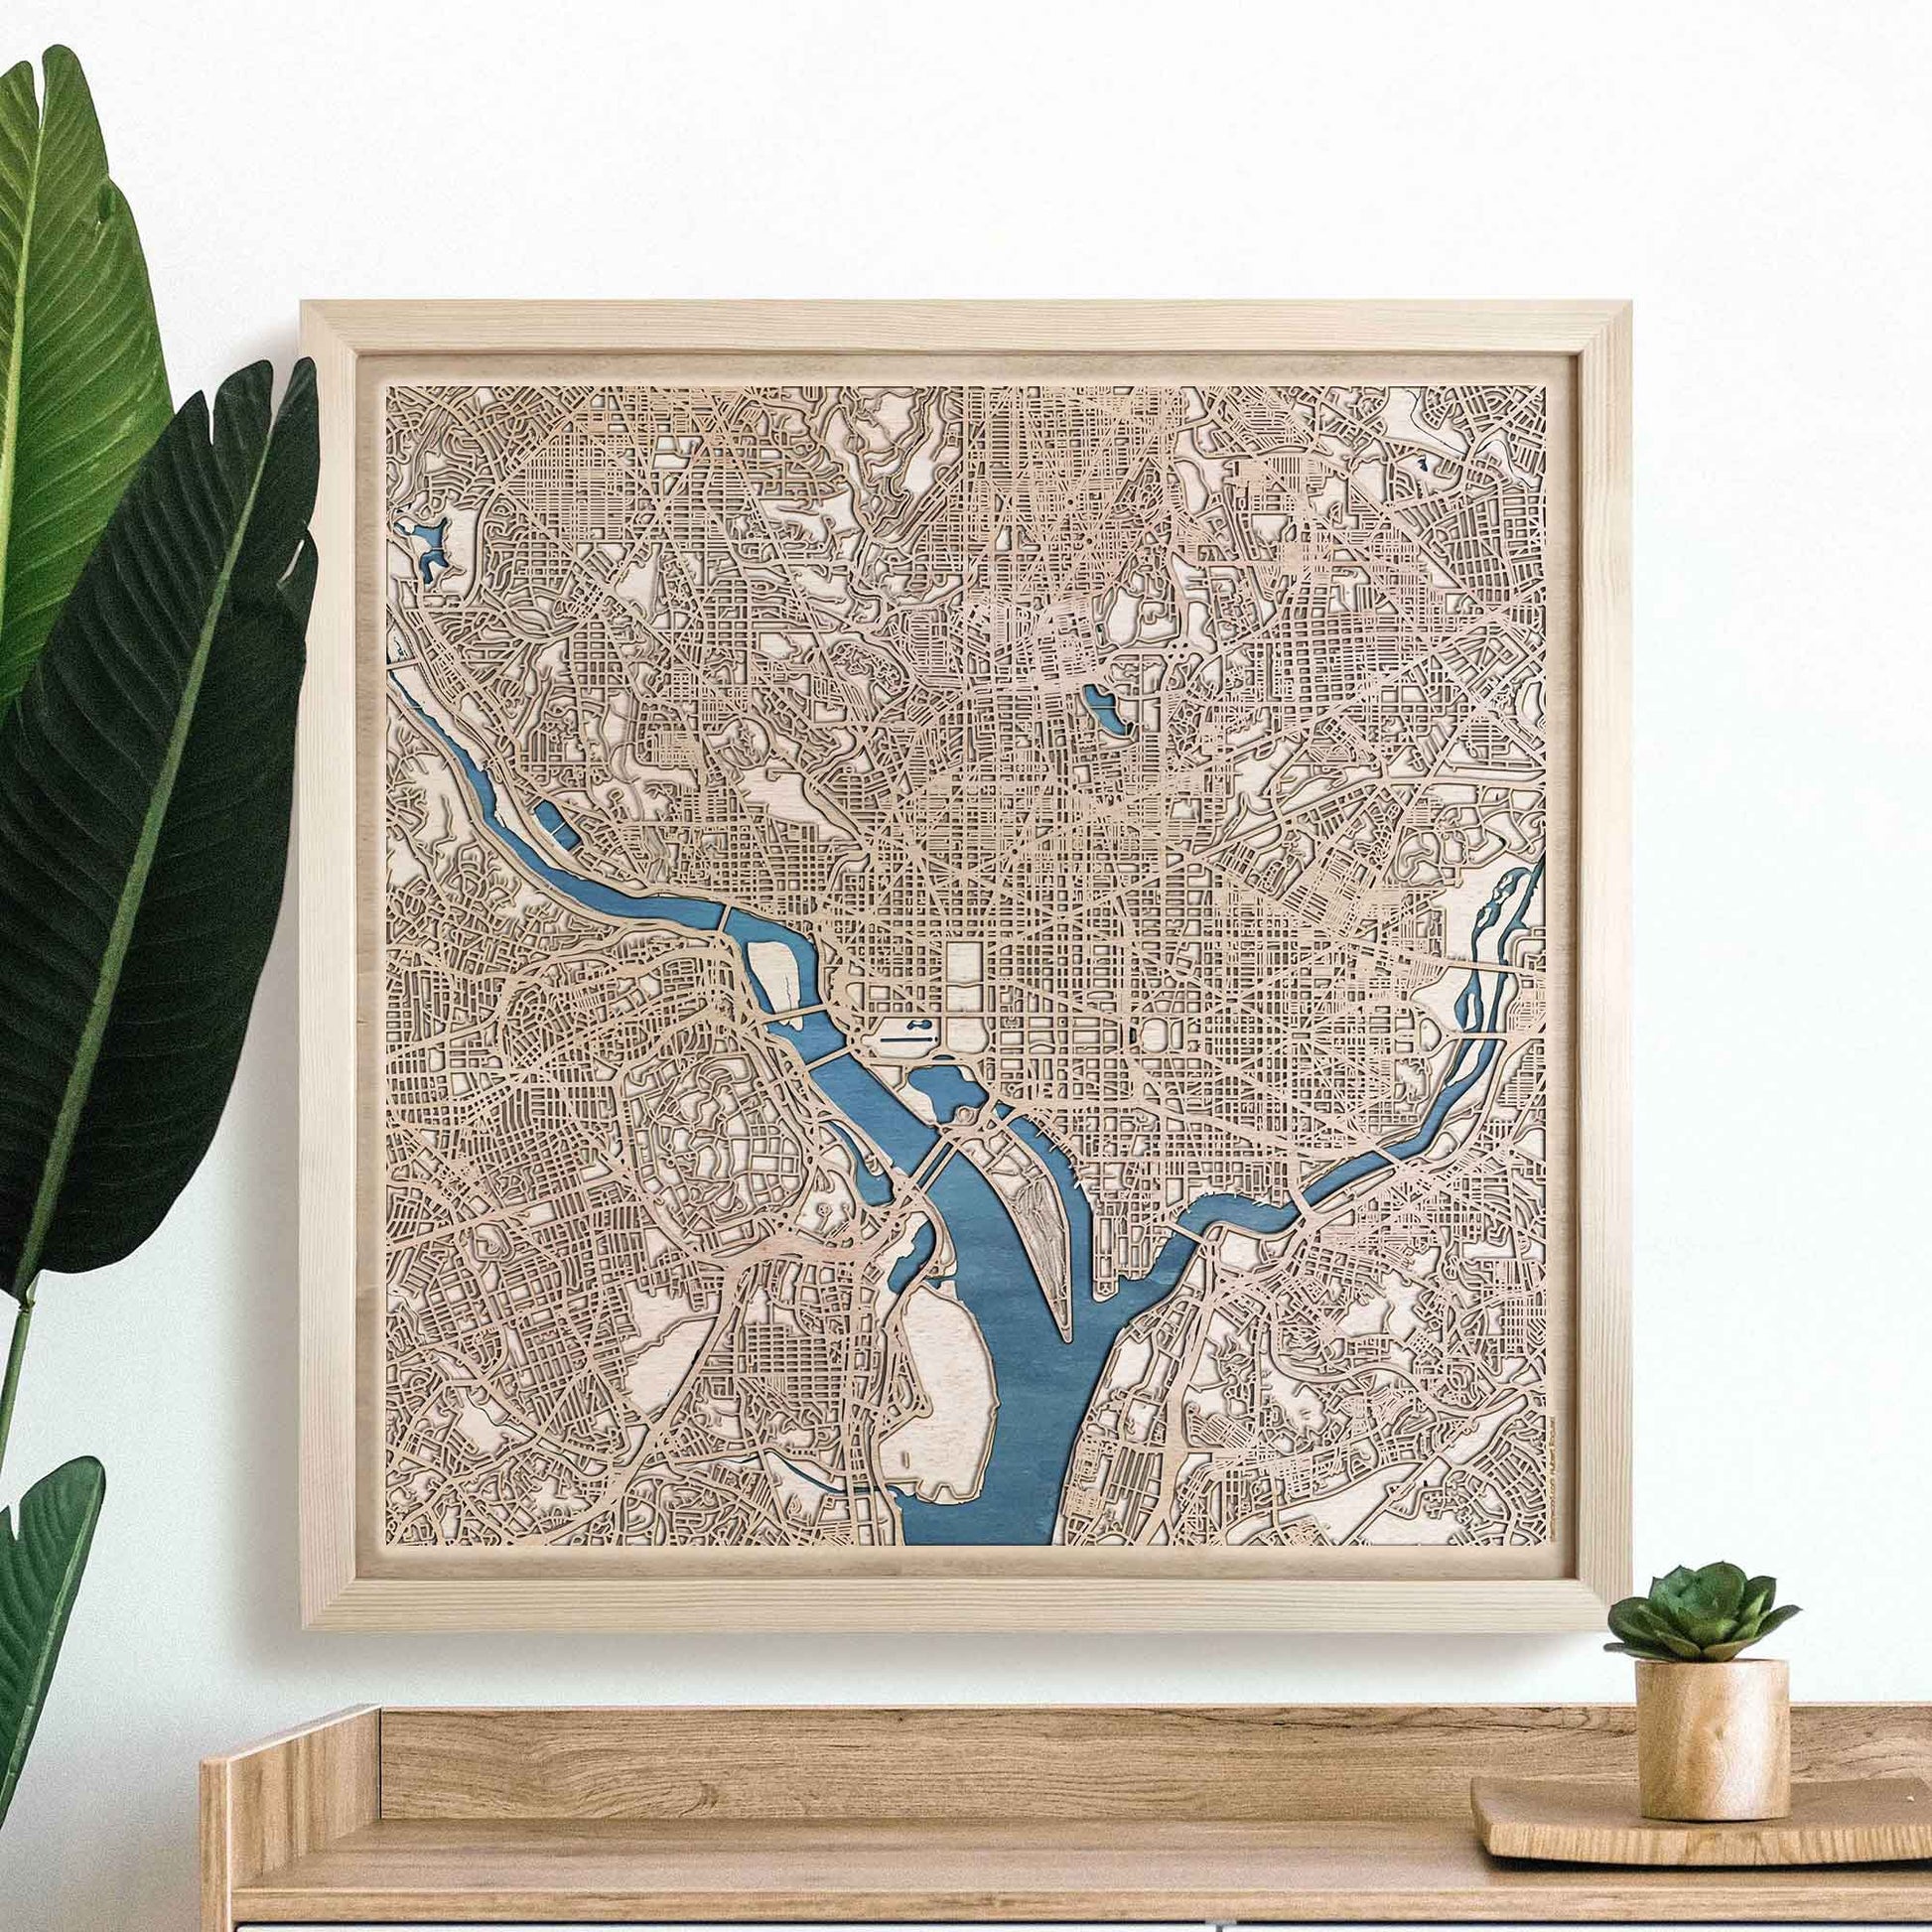 Washington Wooden Map by CityWood - Custom Wood Map Art - Unique Laser Cut Engraved - Anniversary Gift